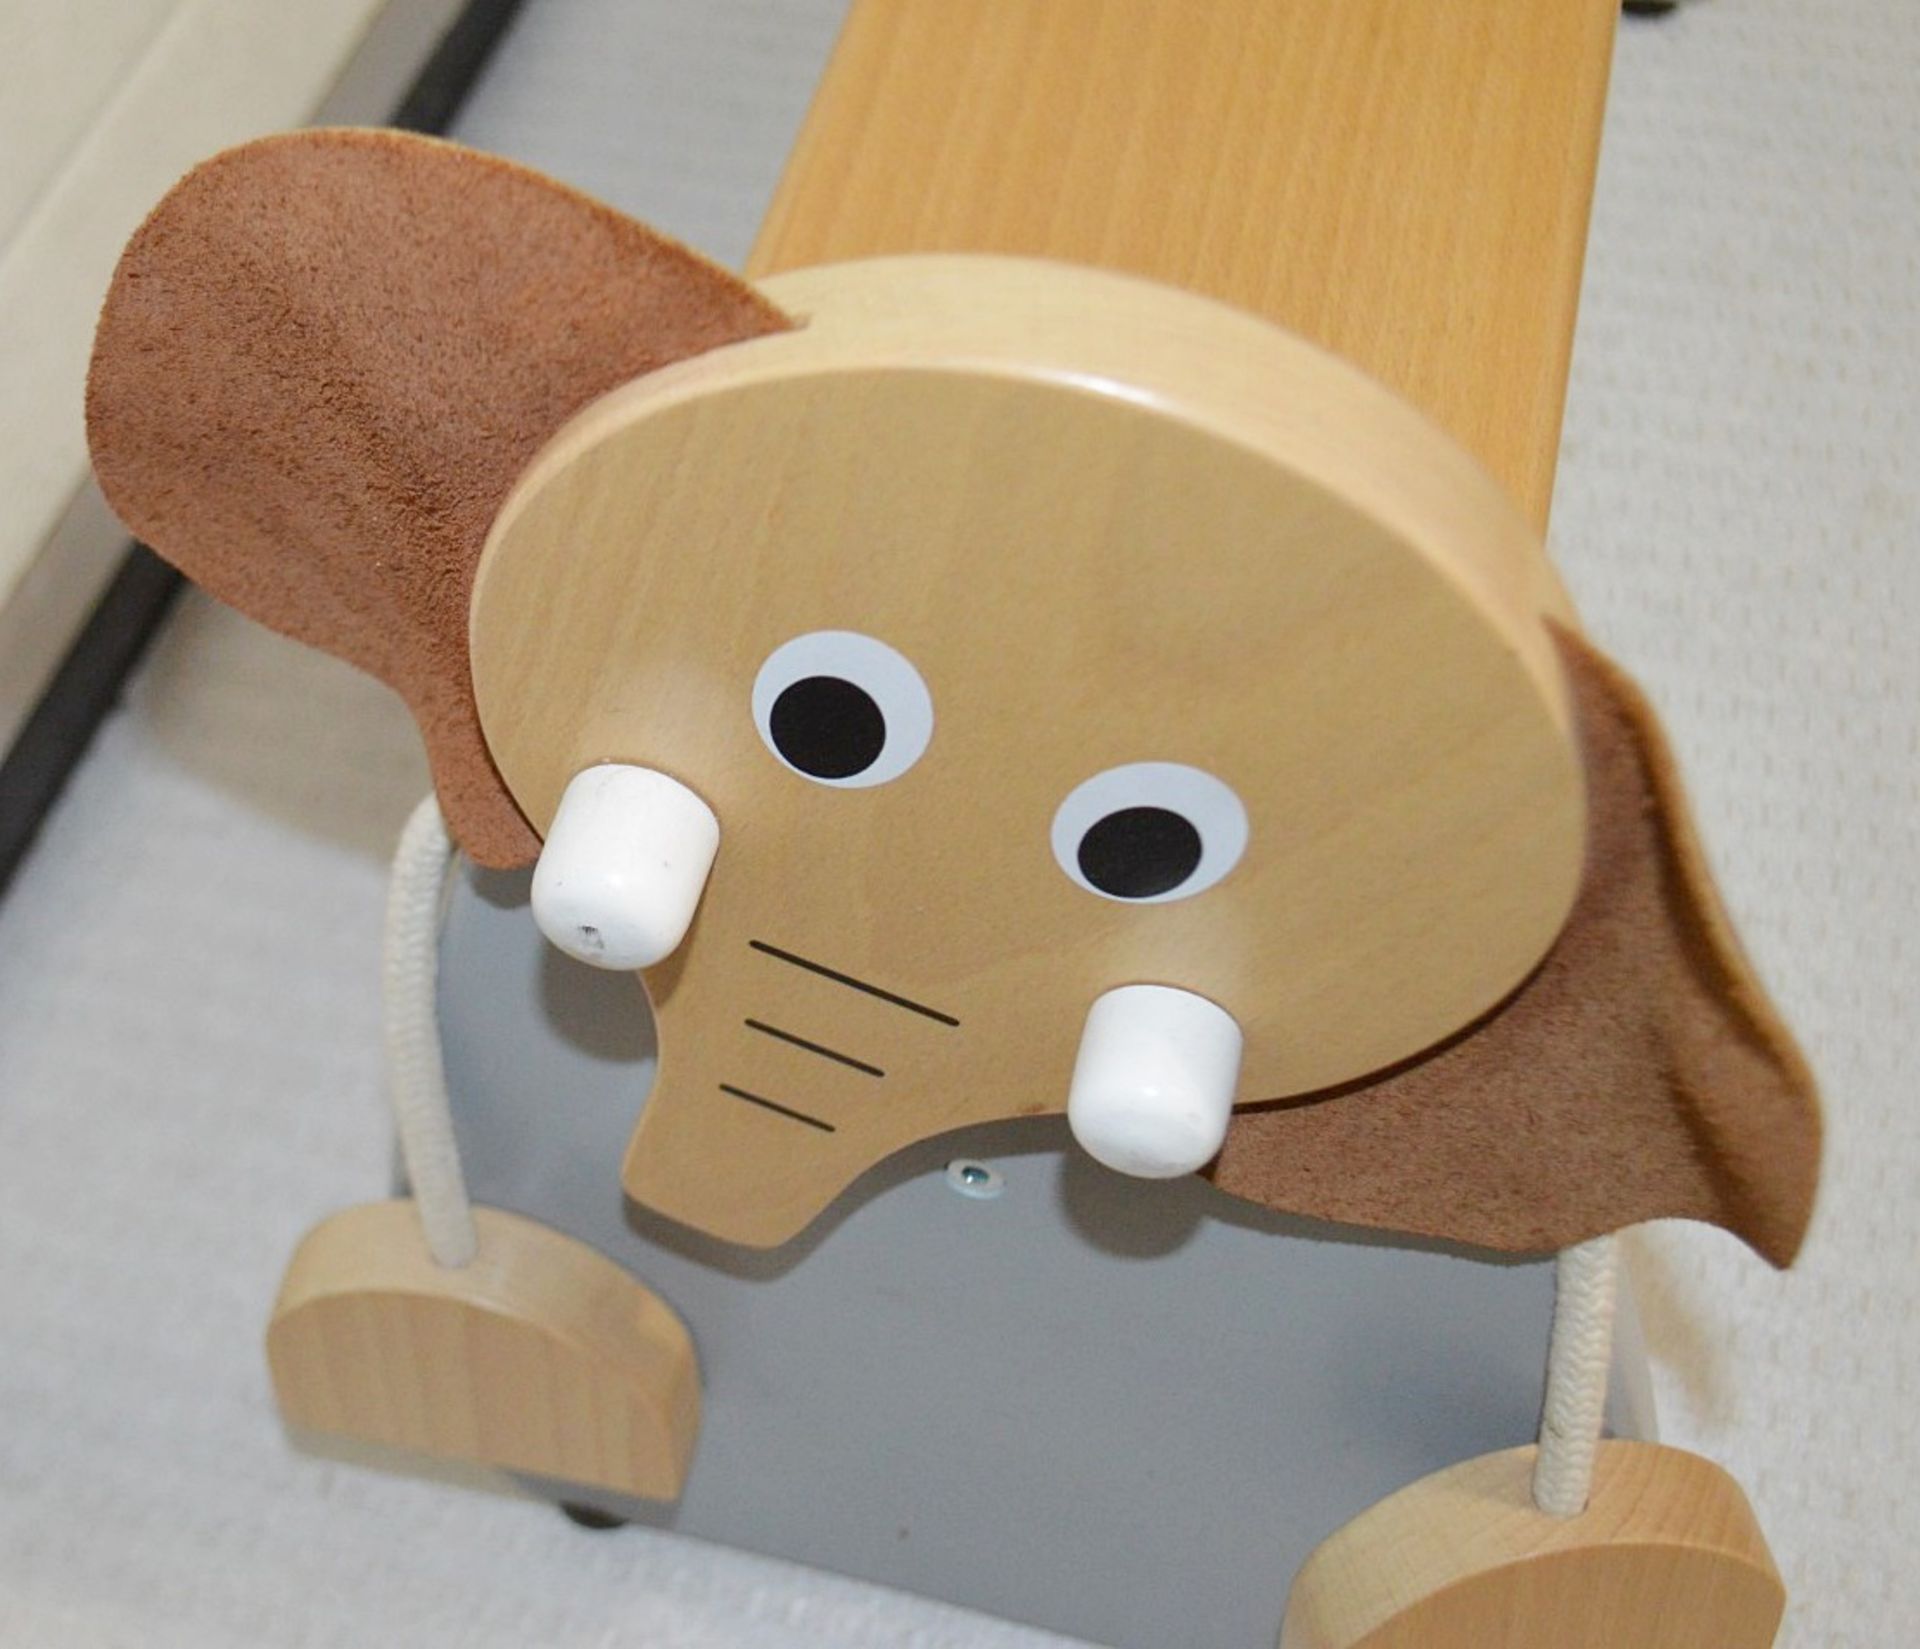 1 x Child's Solid Wood Stool / Shoe Step In The Style Of An Elephant With Real Leather Ears - A Very - Image 5 of 6